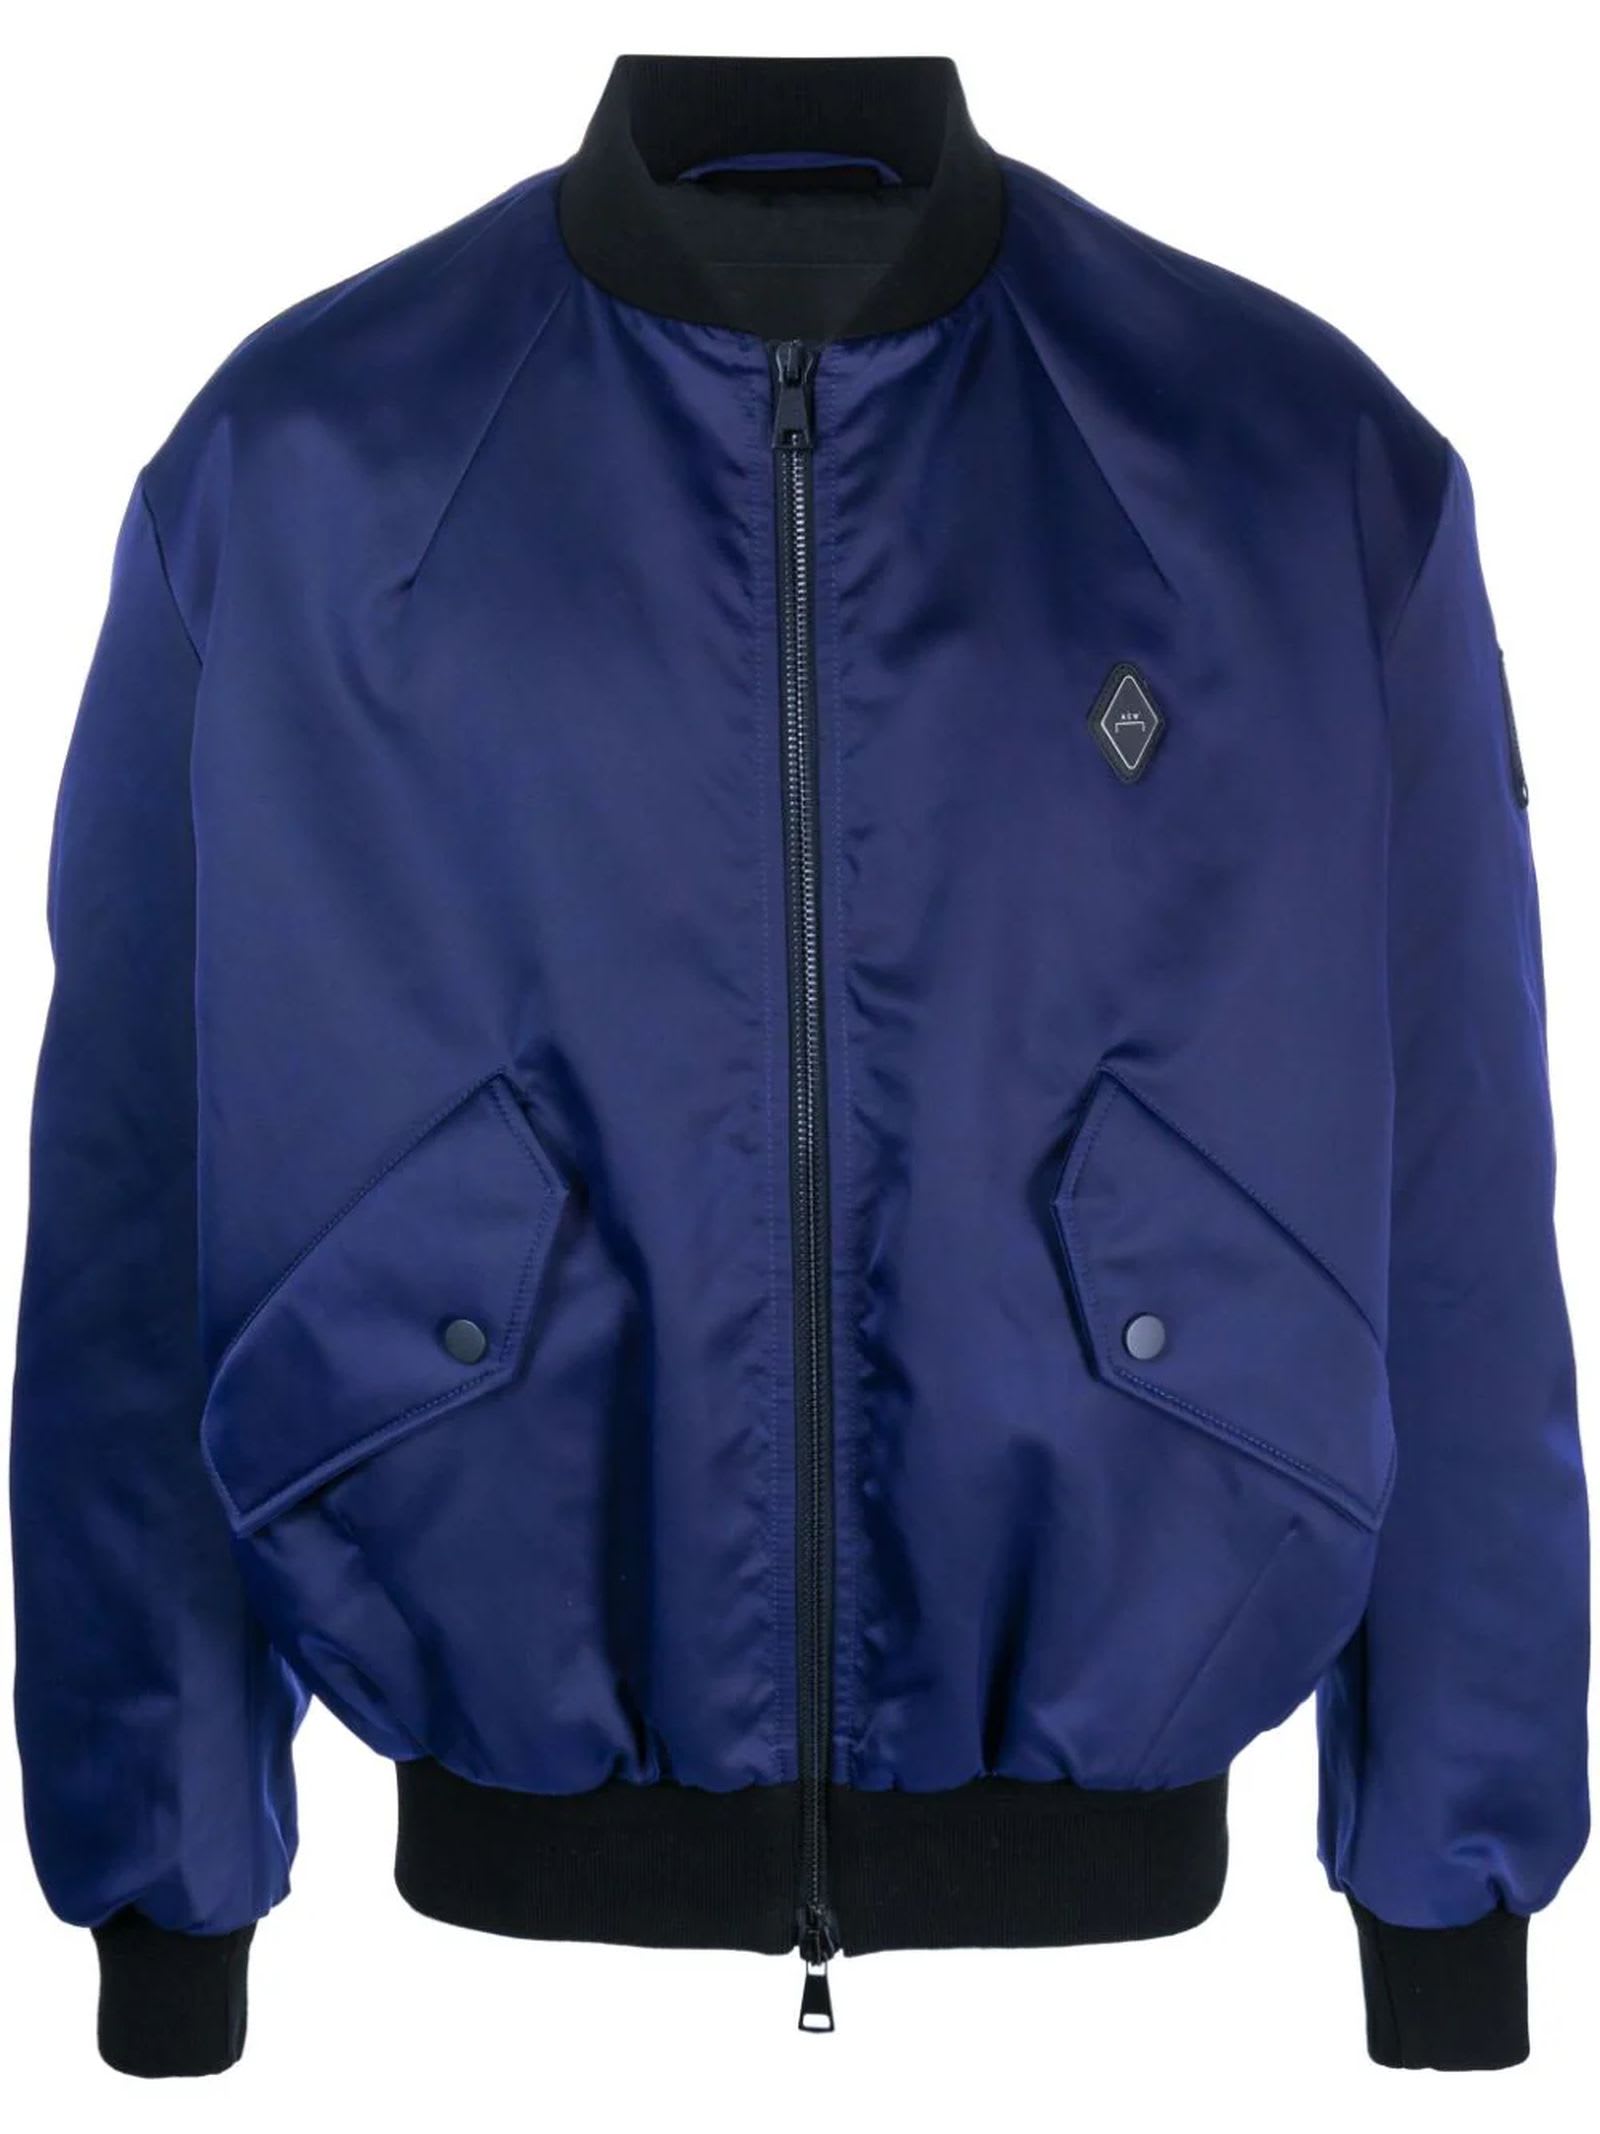 A-COLD-WALL* MIDNIGHT BLUE BOMBER JACKET